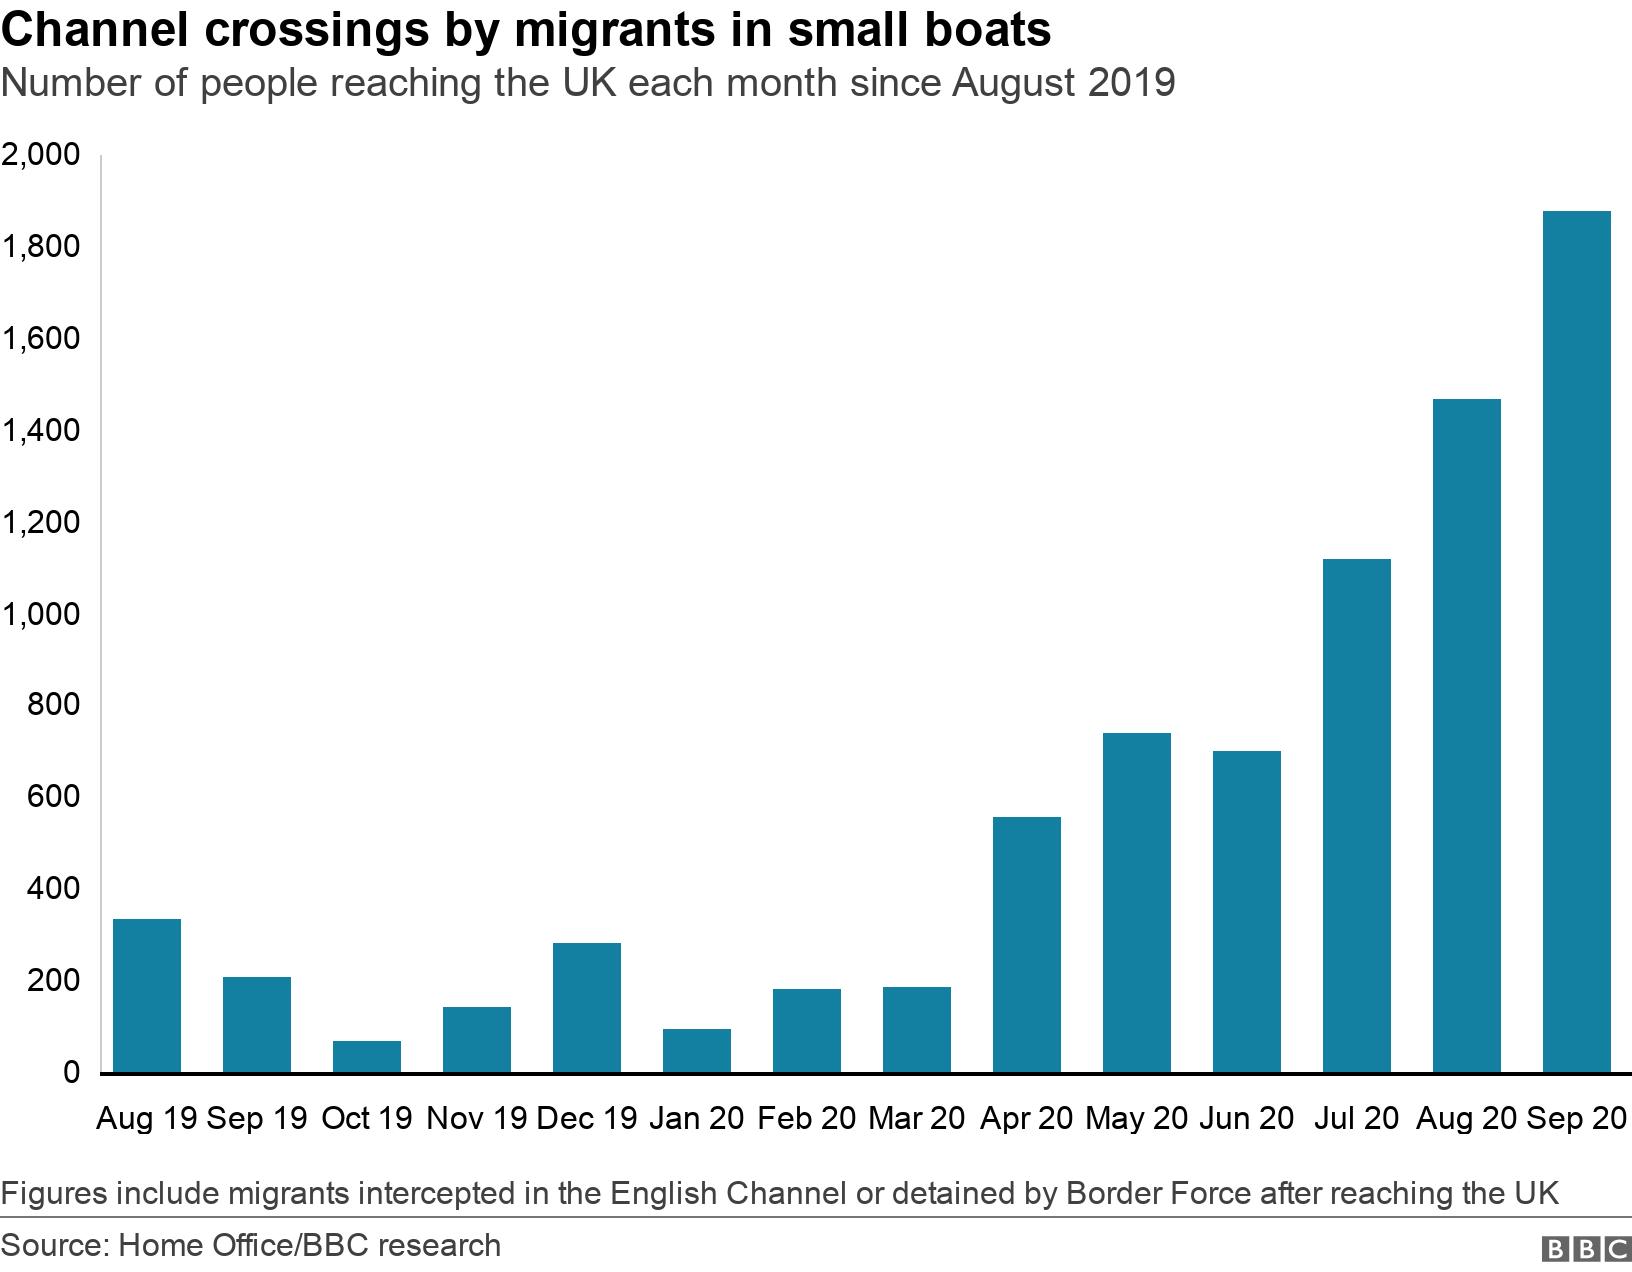 Channel crossings by migrants in small boats. Number of people reaching the UK each month since August 2019.  Figures include migrants intercepted in the English Channel or detained by Border Force after reaching the UK.